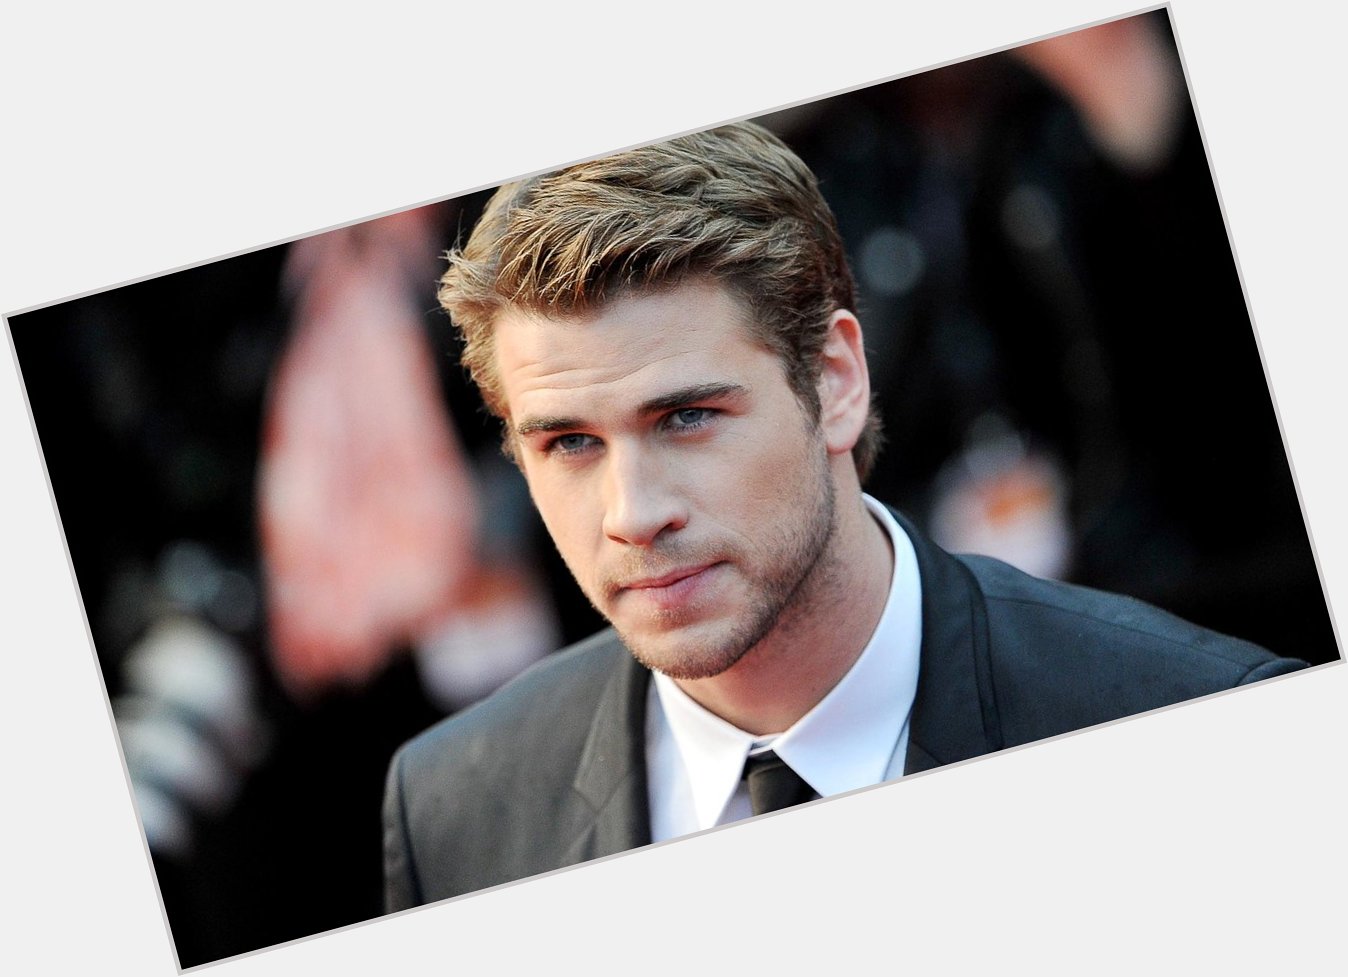 Happy Birthday Liam Hemsworth! Which movie has been your favorite so far? 